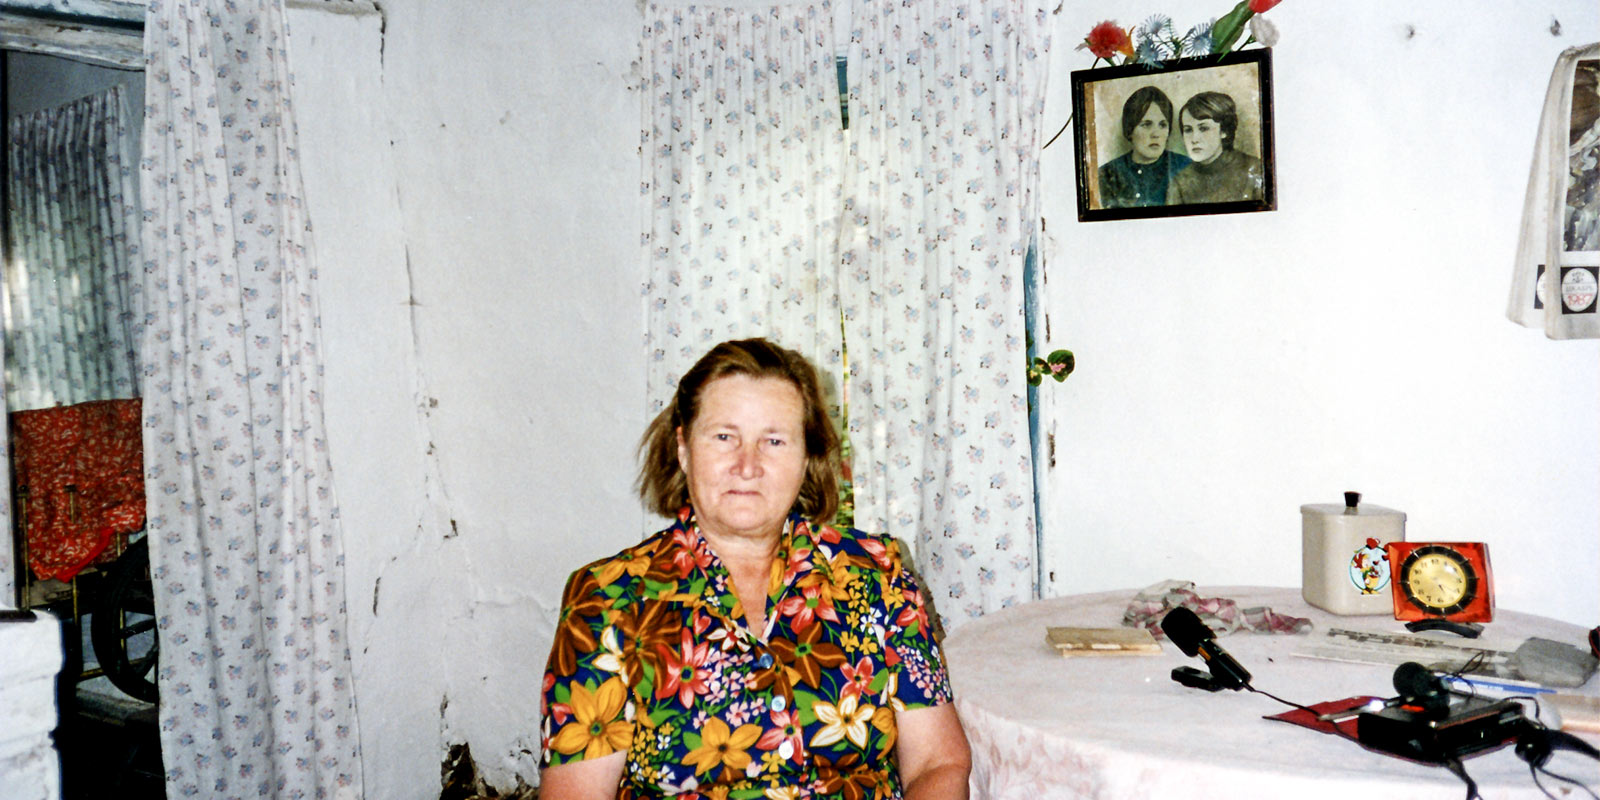 Erna Õigus acquired most of her repertoire in her native village of Yuryevka. Photo: A. Korb 1994.